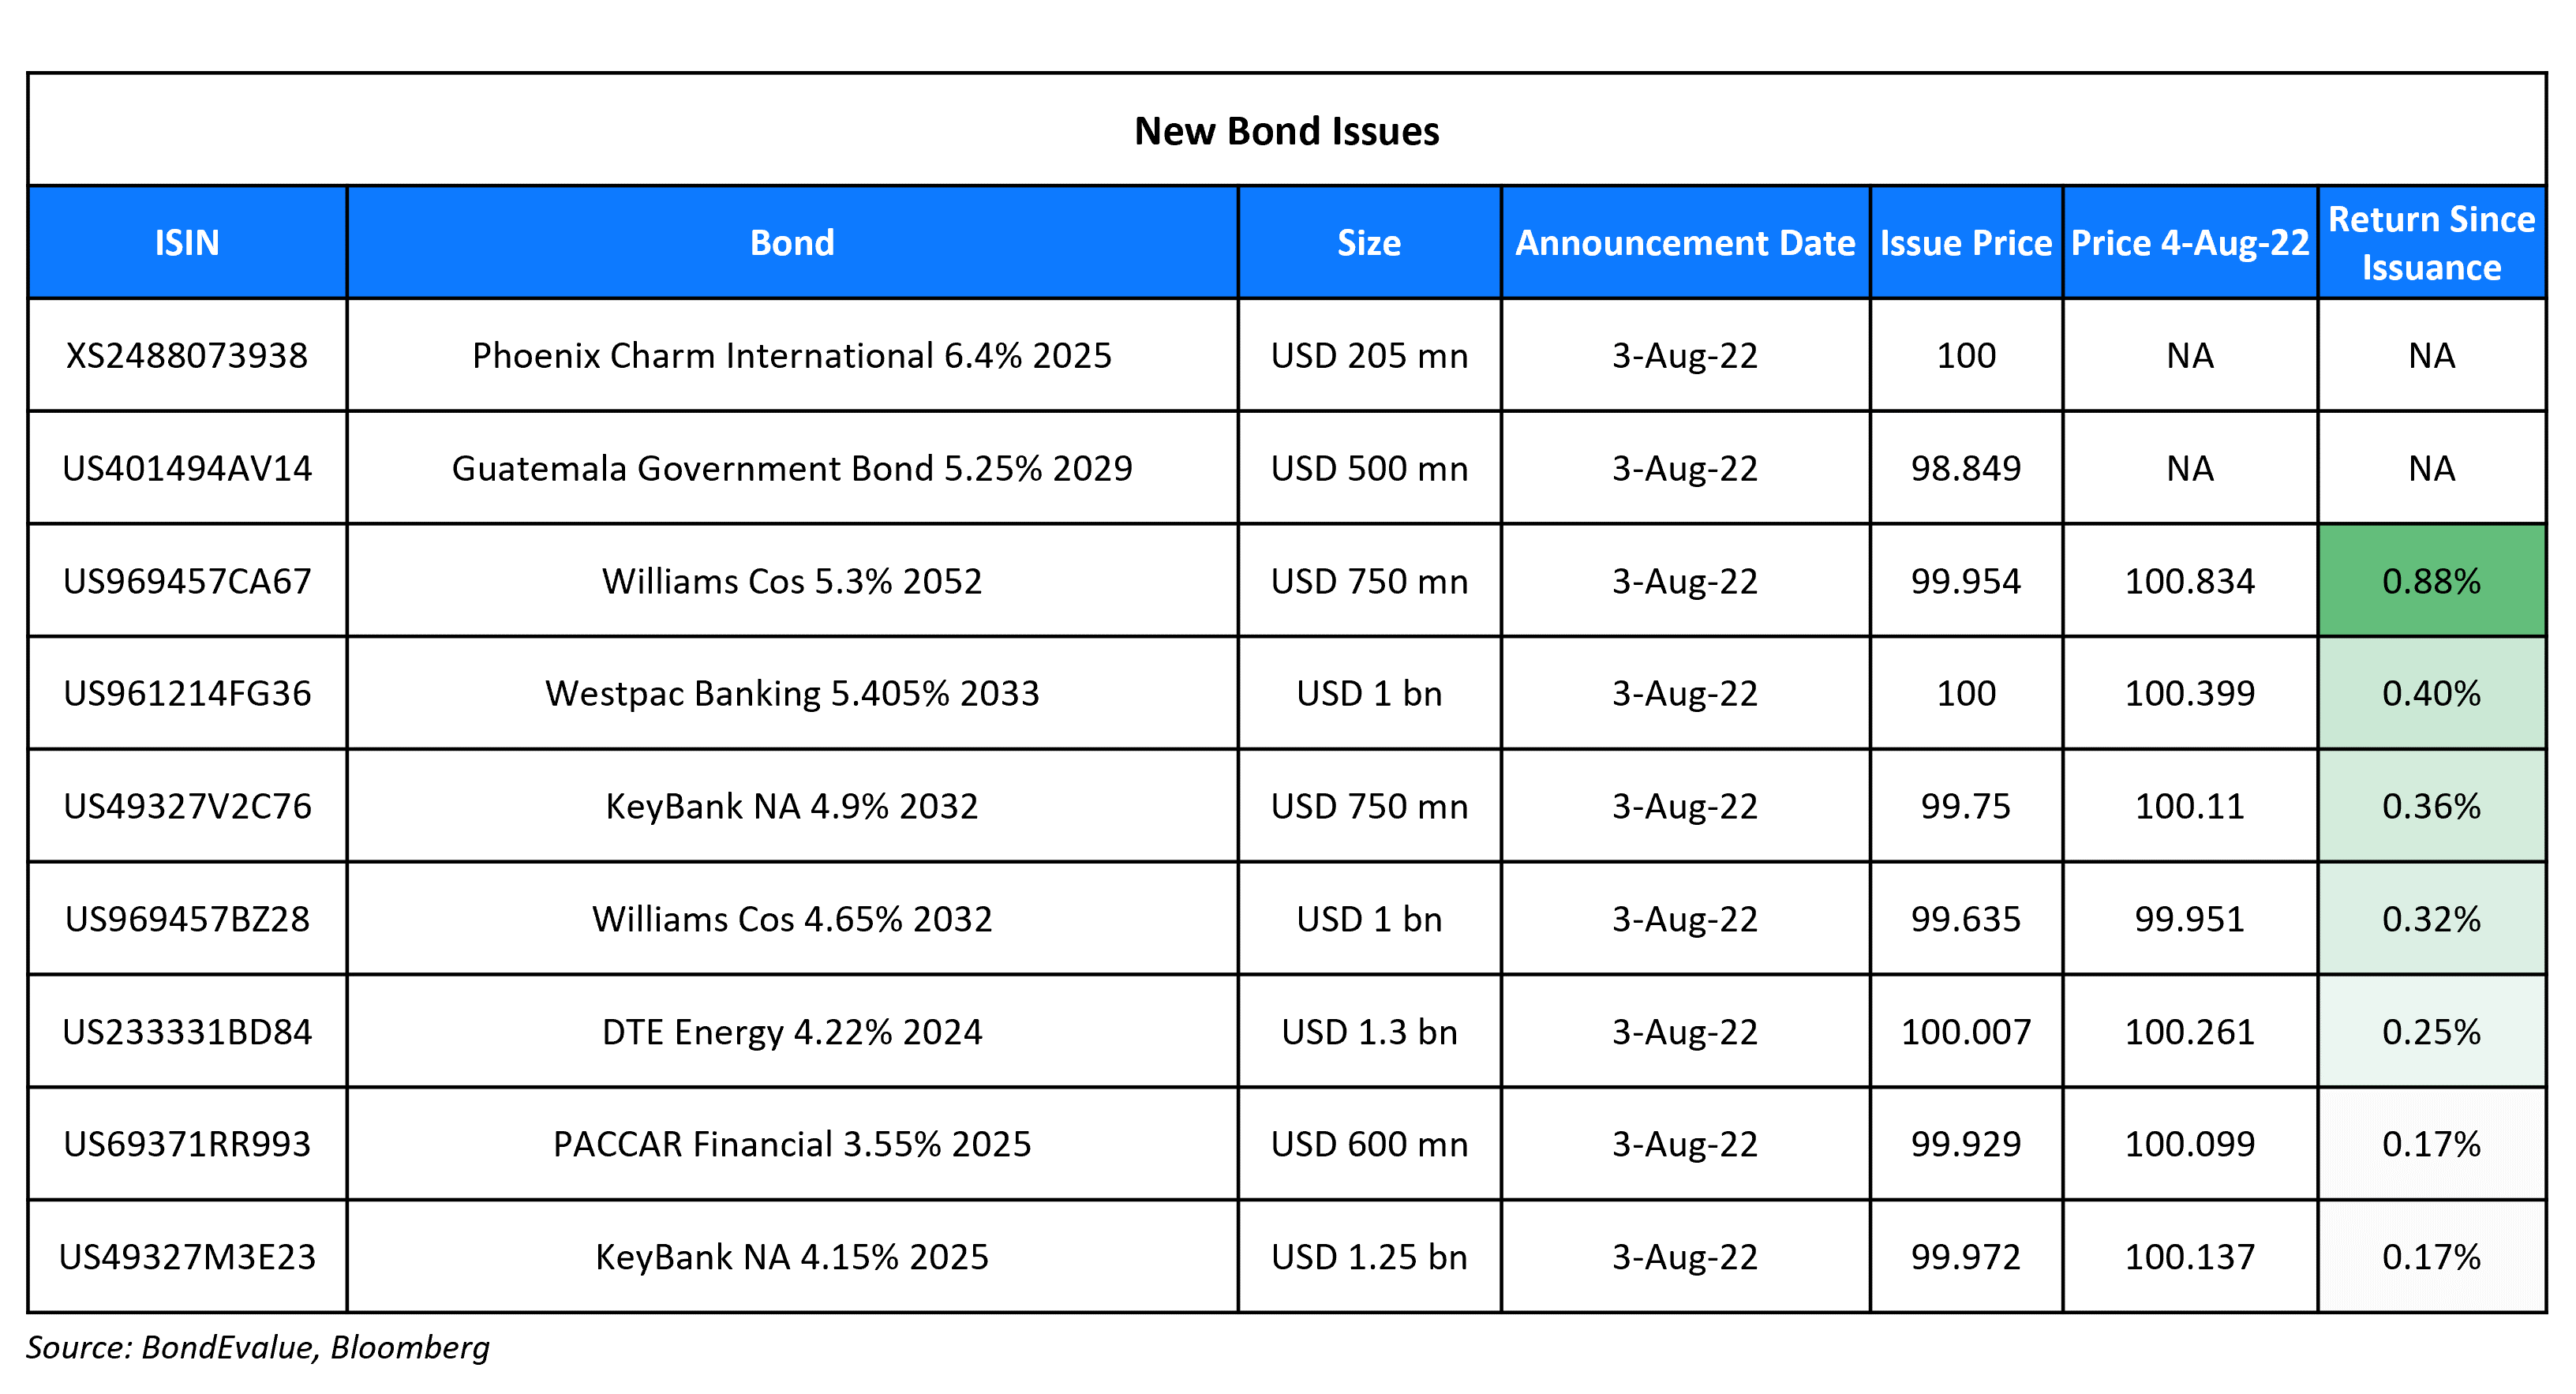 New Bond Issues 4 Aug 22